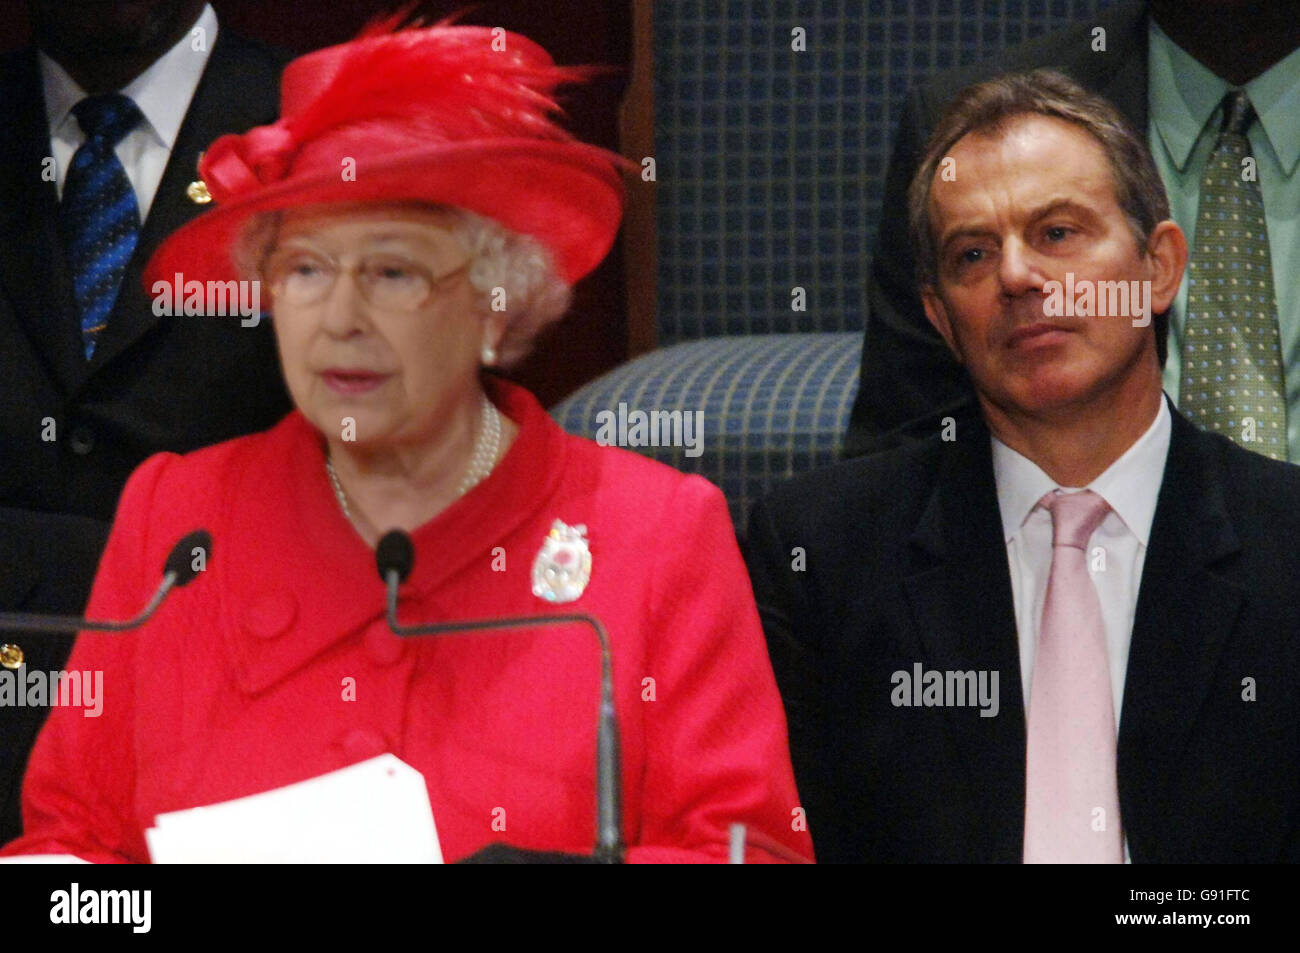 Britain's Queen Elizabeth II addresses the Commonwealth Head of Governments Meeting in Valletta, Malta, as Britain's Prime Minster Tony Blair listens (right). Stock Photo